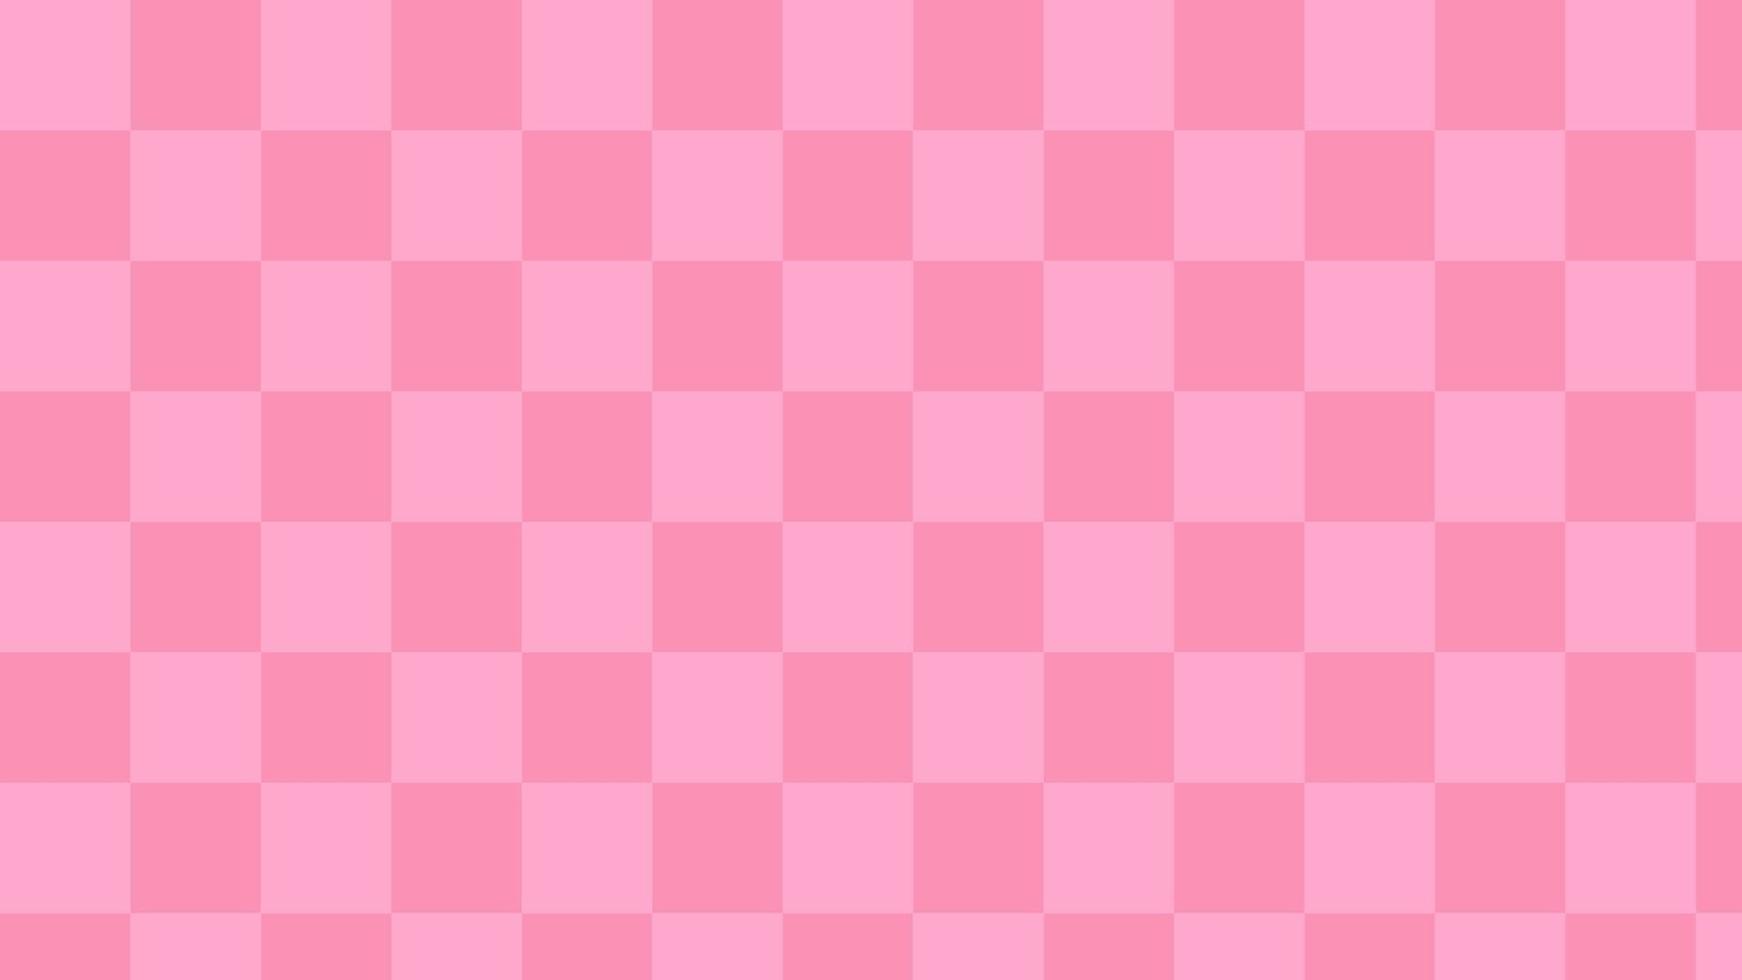 pink checkers, gingham, plaid, aesthetic checkerboard pattern wallpaper illustration, perfect for wallpaper, backdrop, postcard, background for your design